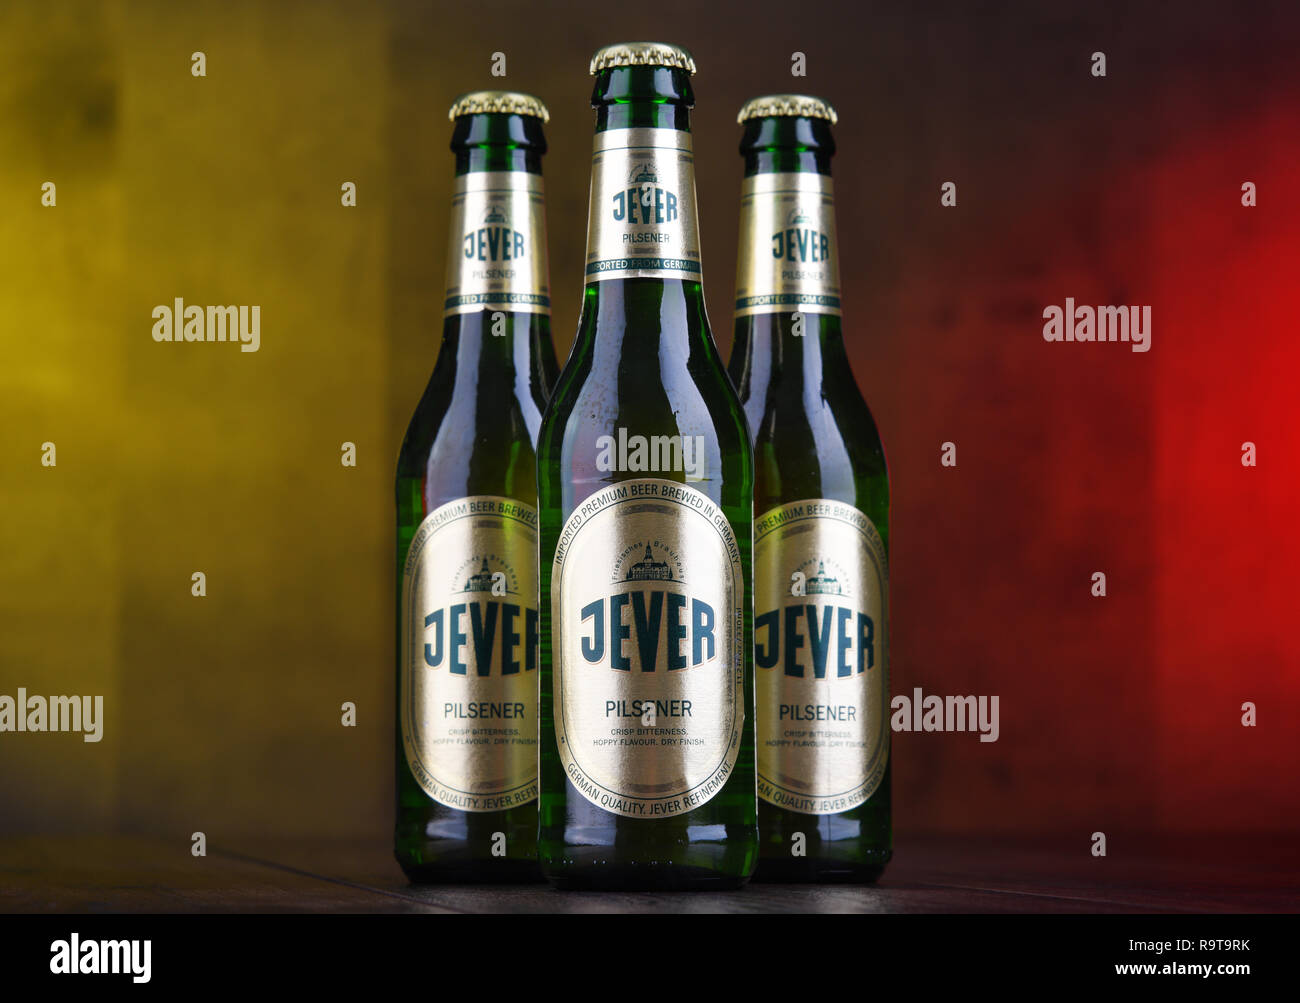 POZNAN, POL - DEC 12, 2018: Bottles Jever, a popular brand of beer produced by Friesisches Brauhaus in Jever, Friesland in Lower Saxony, Germany Stock Photo